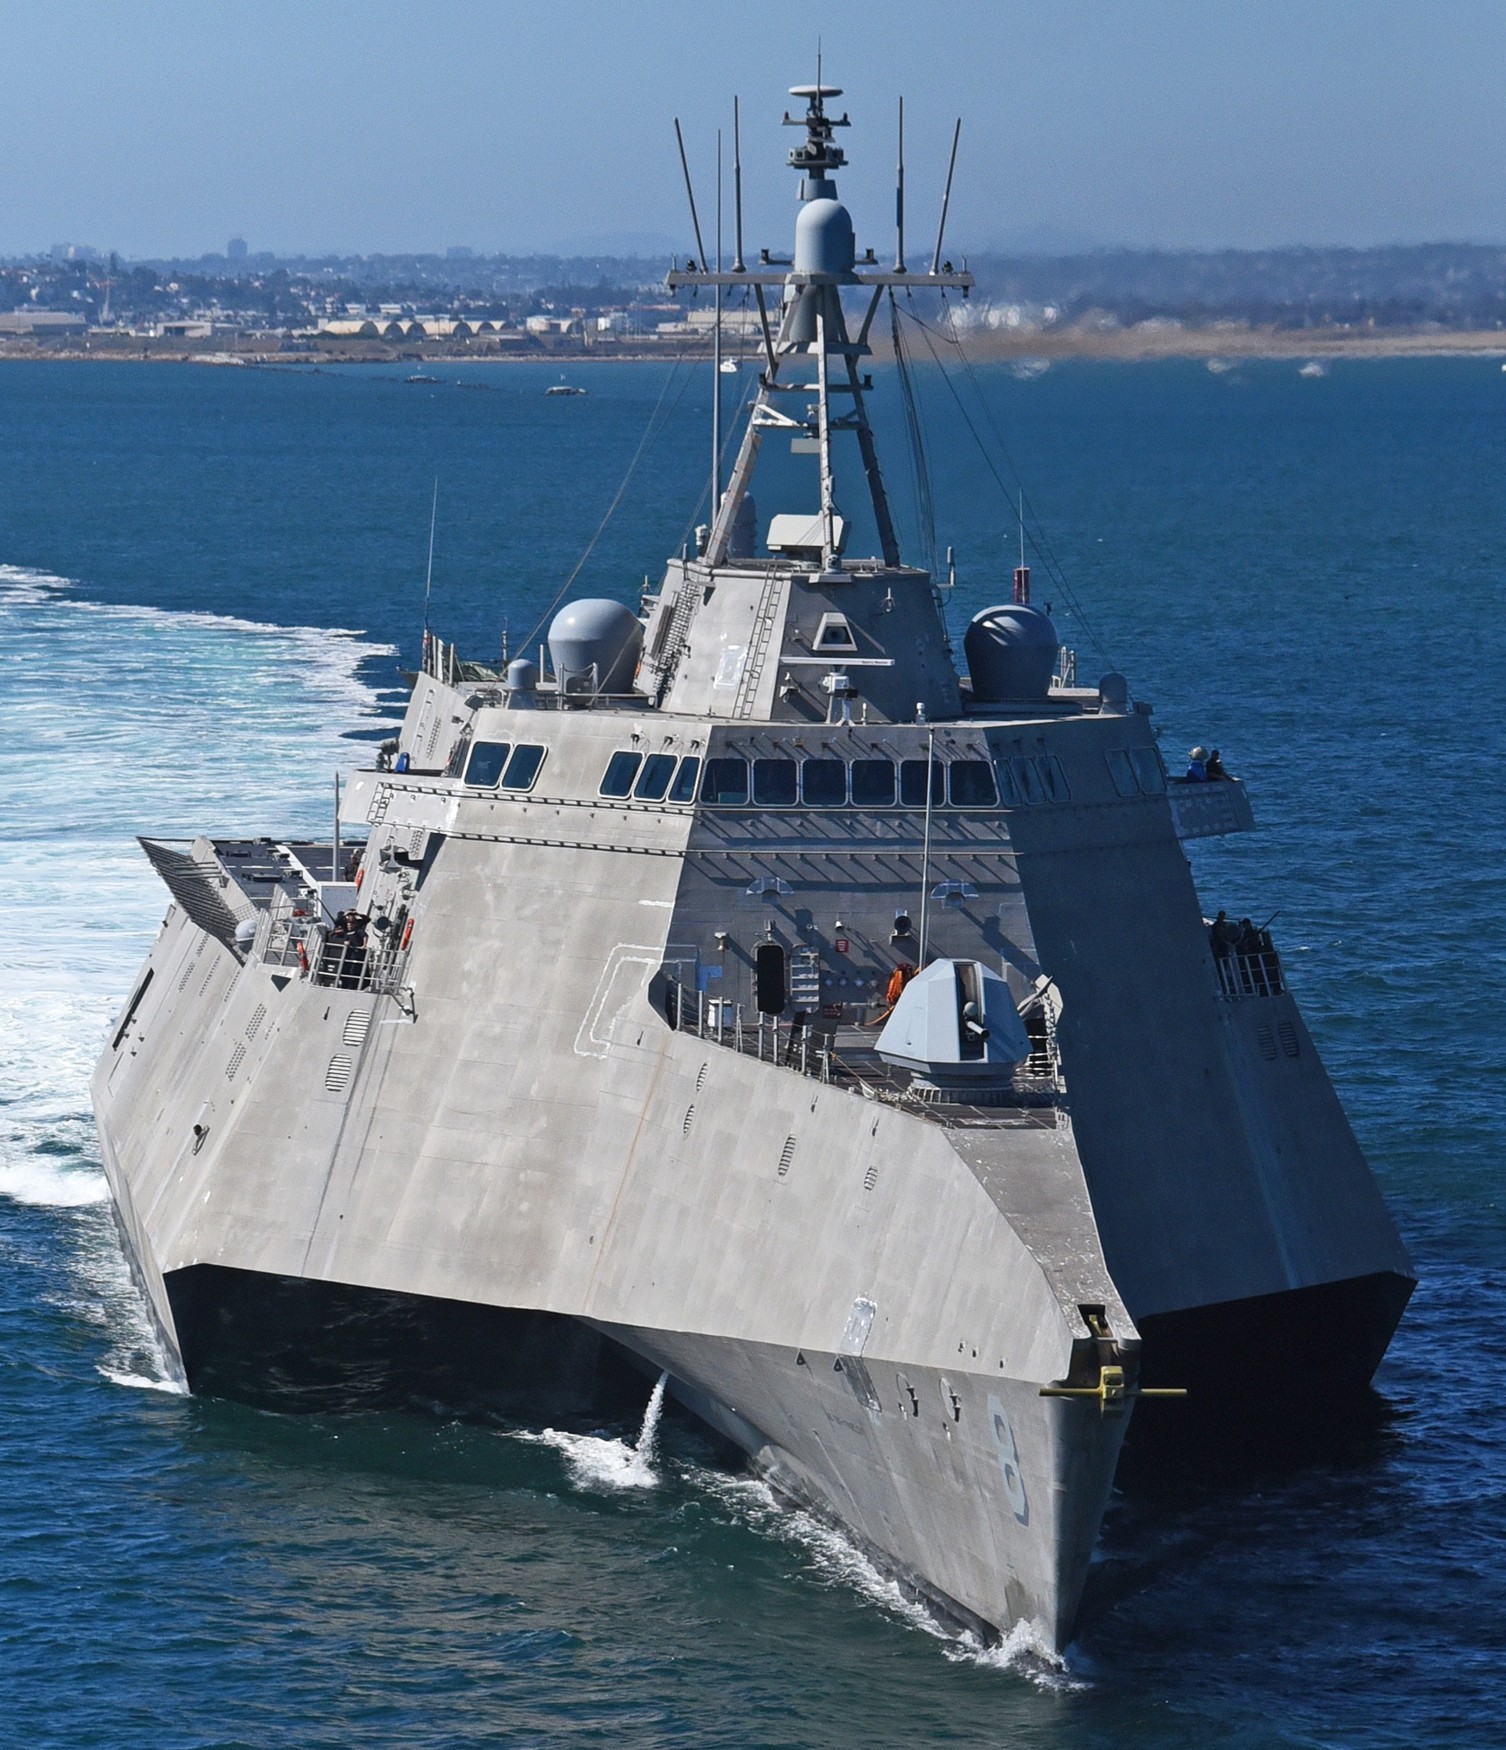 lcs-8 uss montgomery independence class littoral combat ship us navy 45